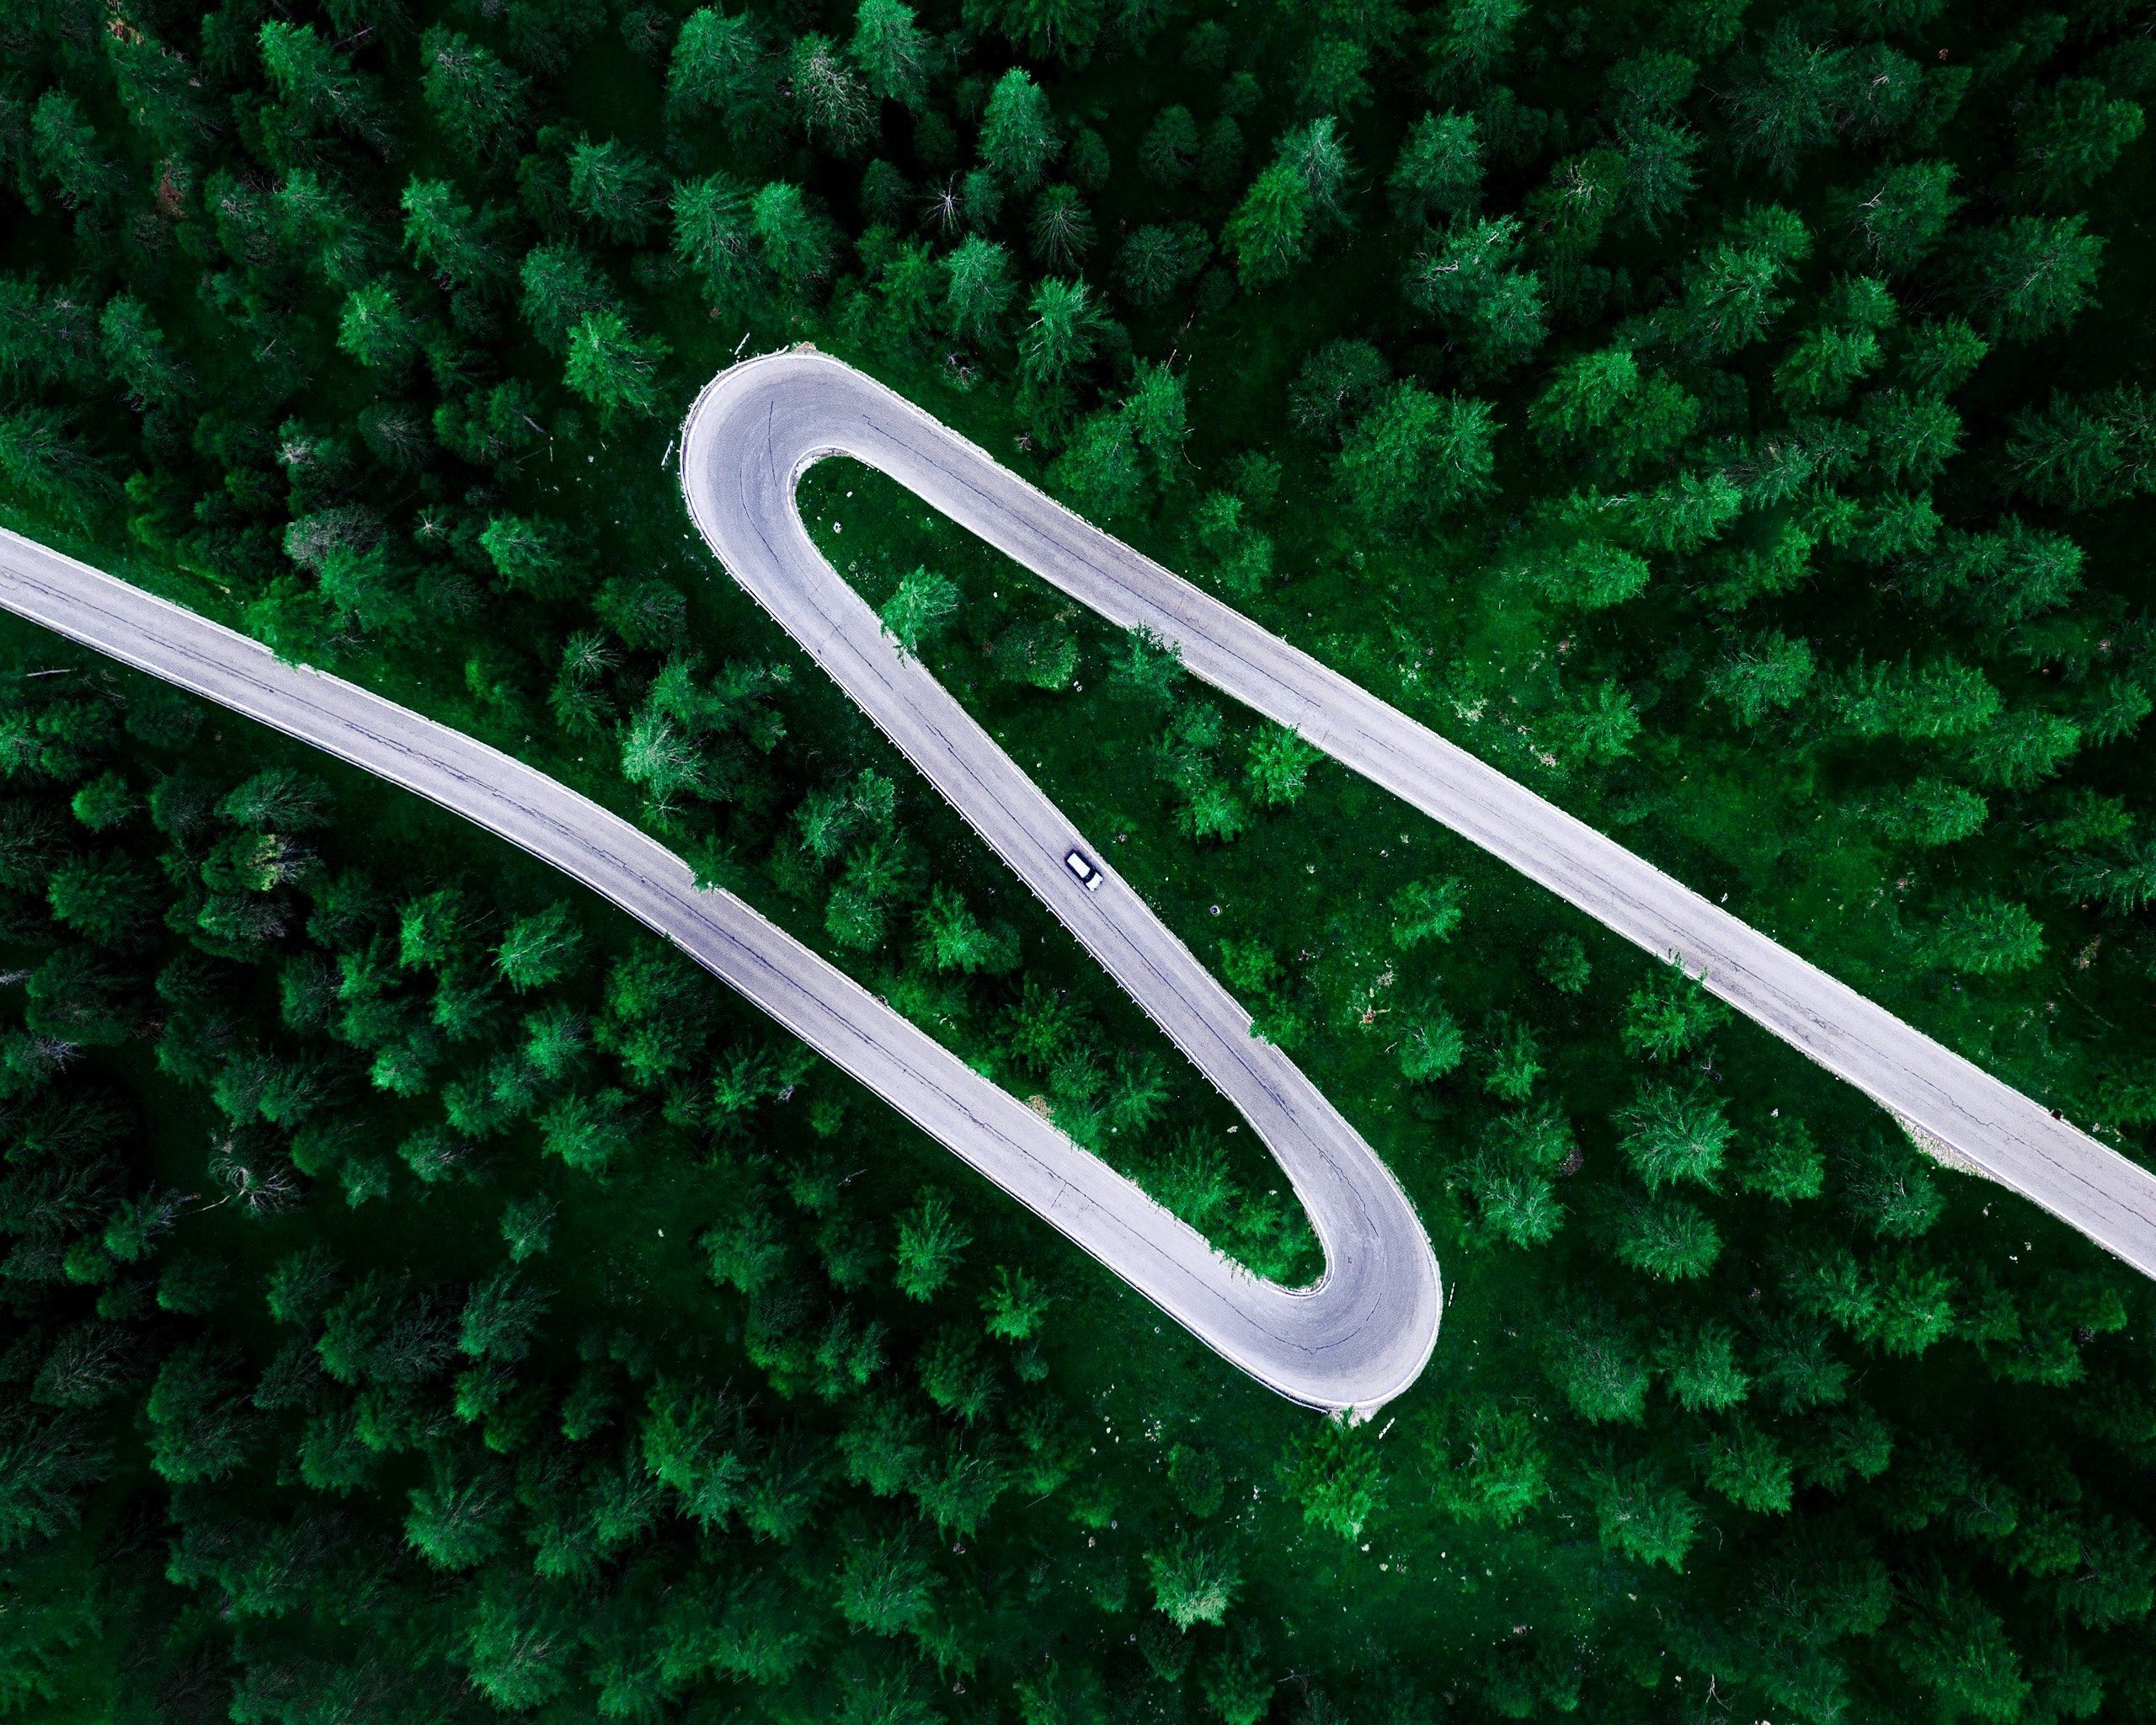 highway likely designed with bezier curve